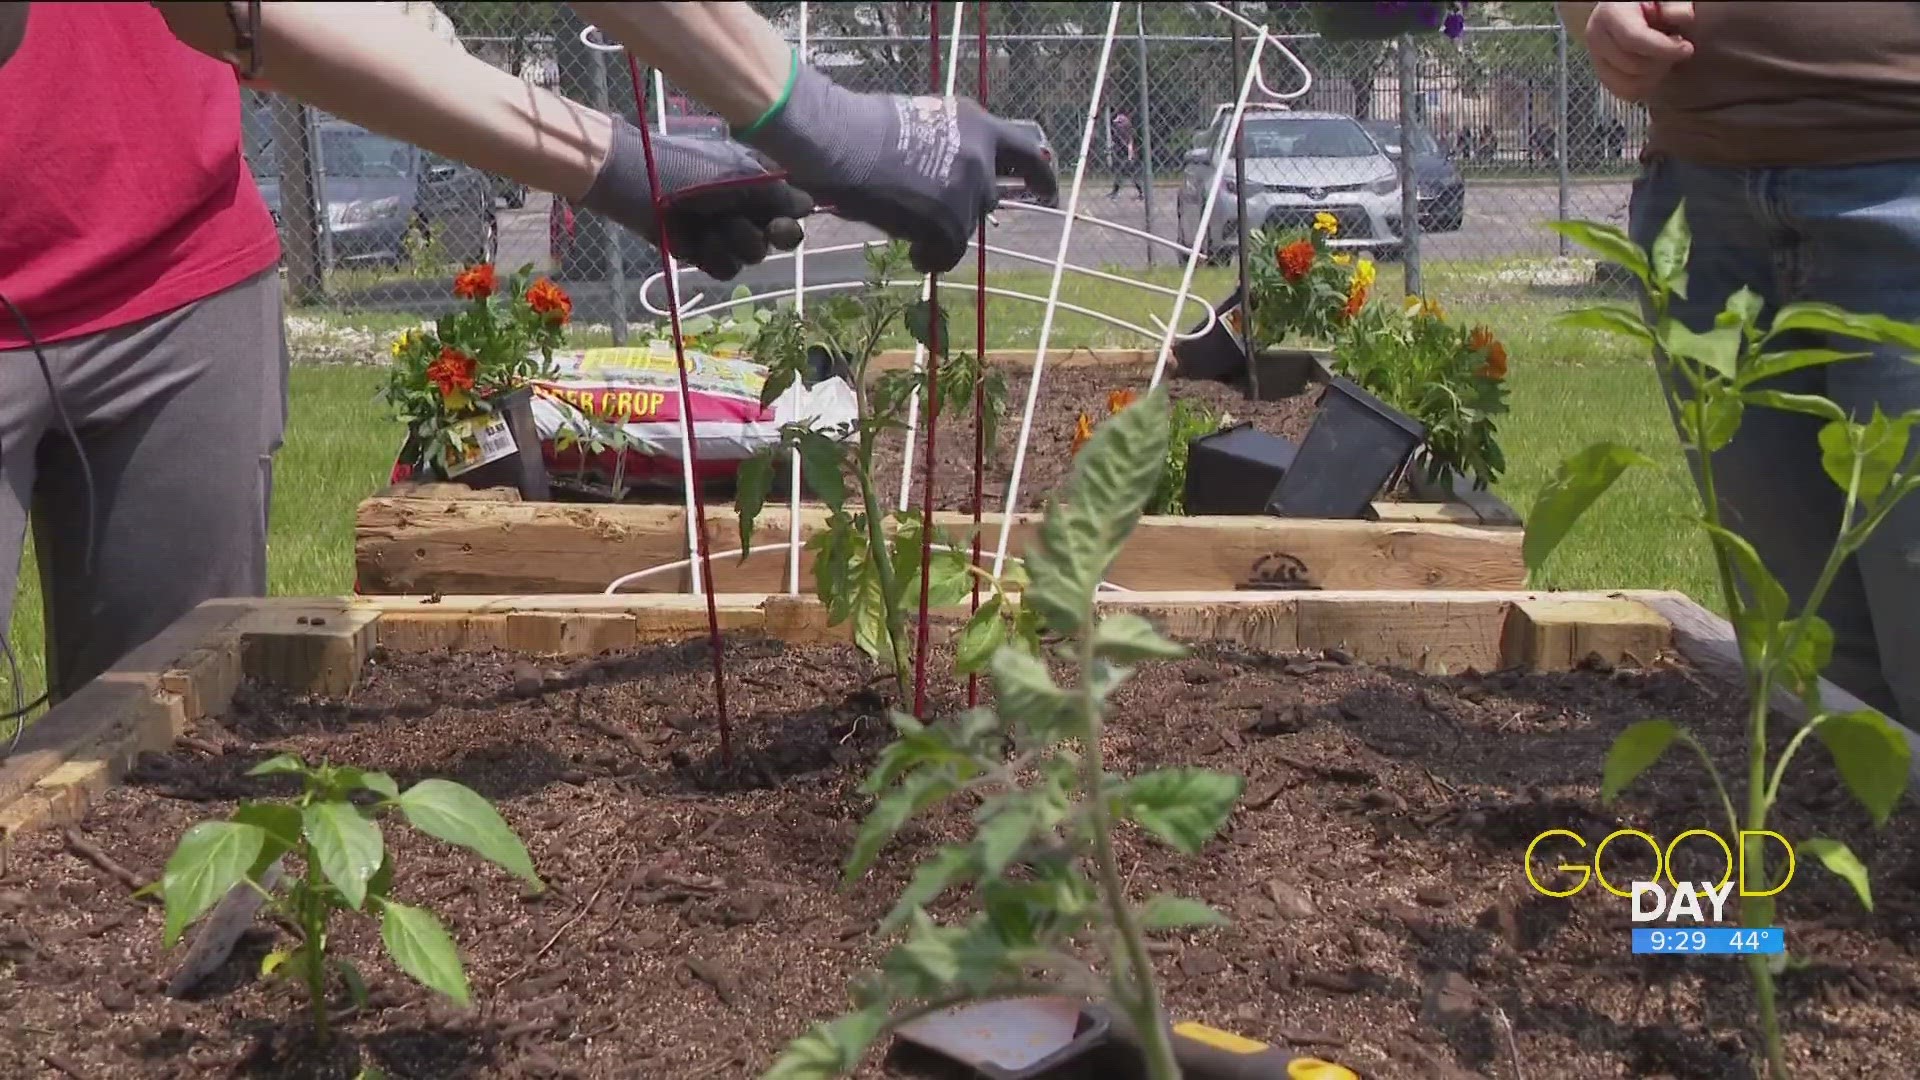 Claire Caryer and Alison Wood-Osmun from Toledo Grows offer some tips and tricks to growing a spectacular garden.